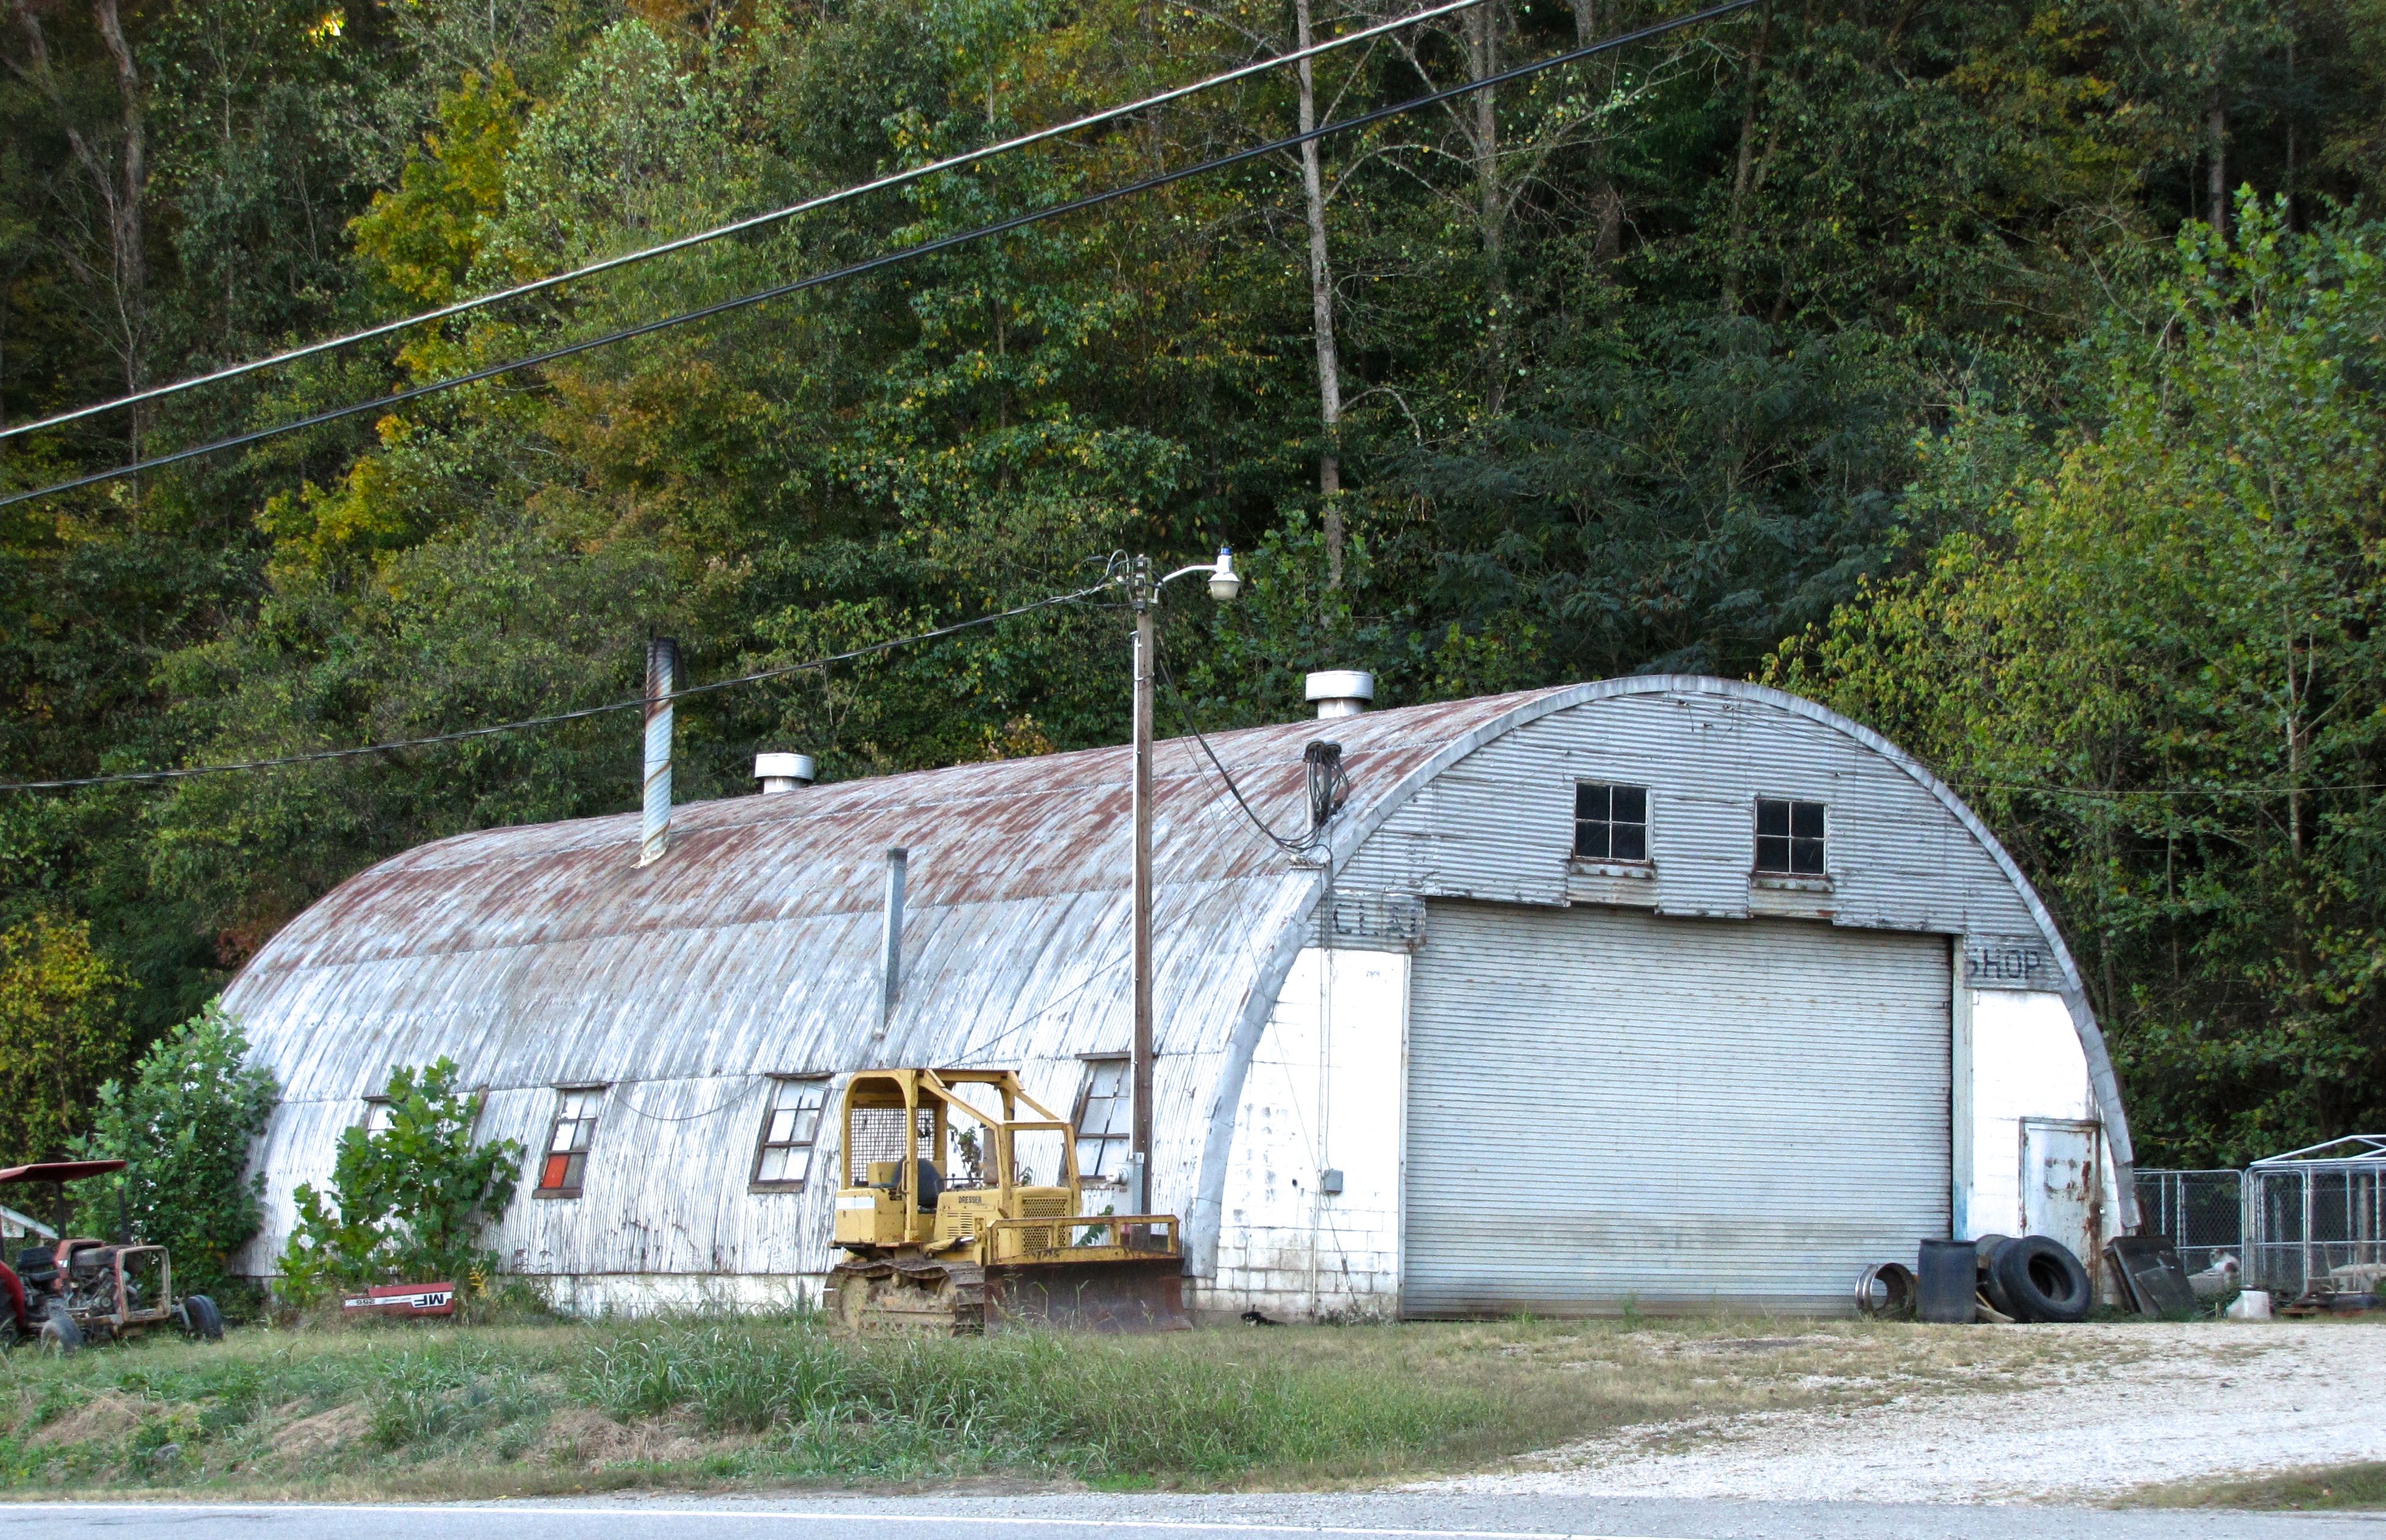 quonset hut in About Us, OH